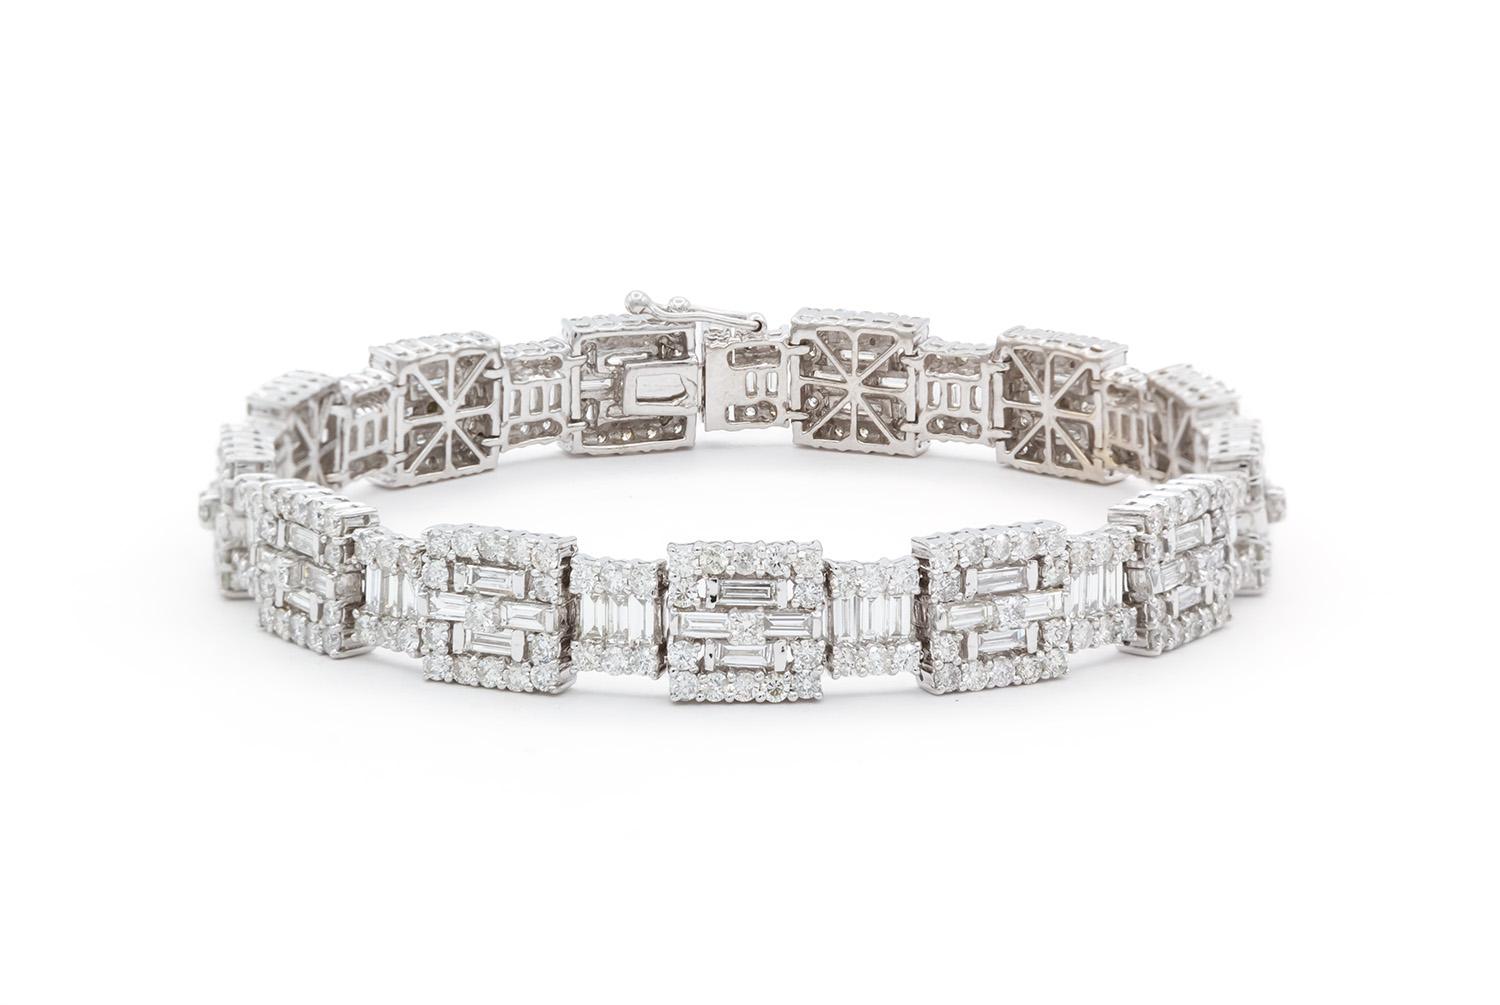 We are pleased to present this stunning White Gold Diamond Contemporary Baguette Diamond Tennis Line Bracelet. It features an estimated 8.40ctw G-H/VS-SI baguette & round brilliant cut diamonds all securely set in this breathtaking 18k white gold